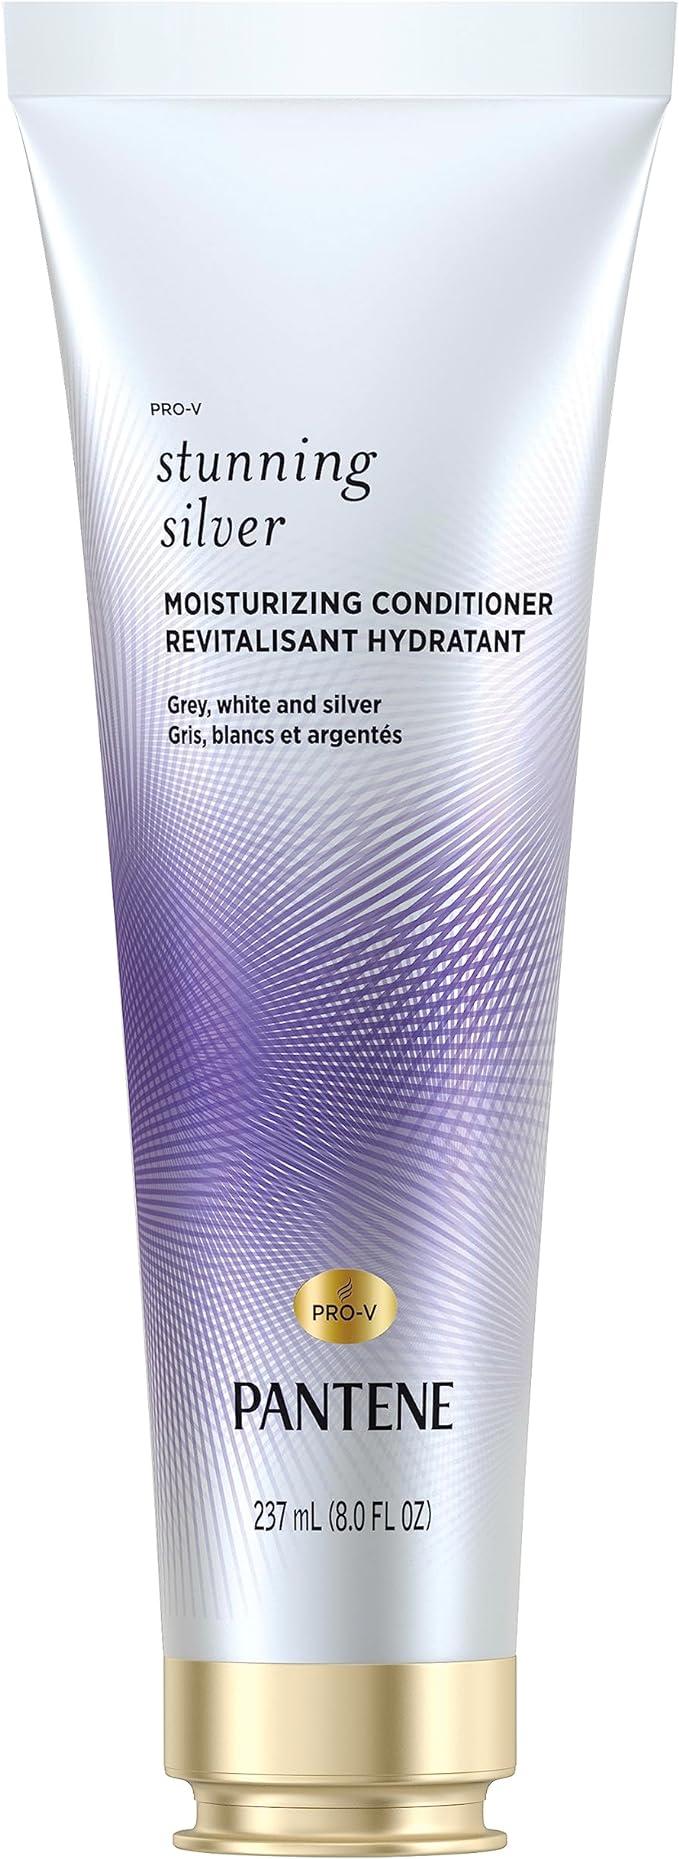 pantene stunning silver moisturizing conditioner for gray and silver dyed hair for women 237 ml  pantene